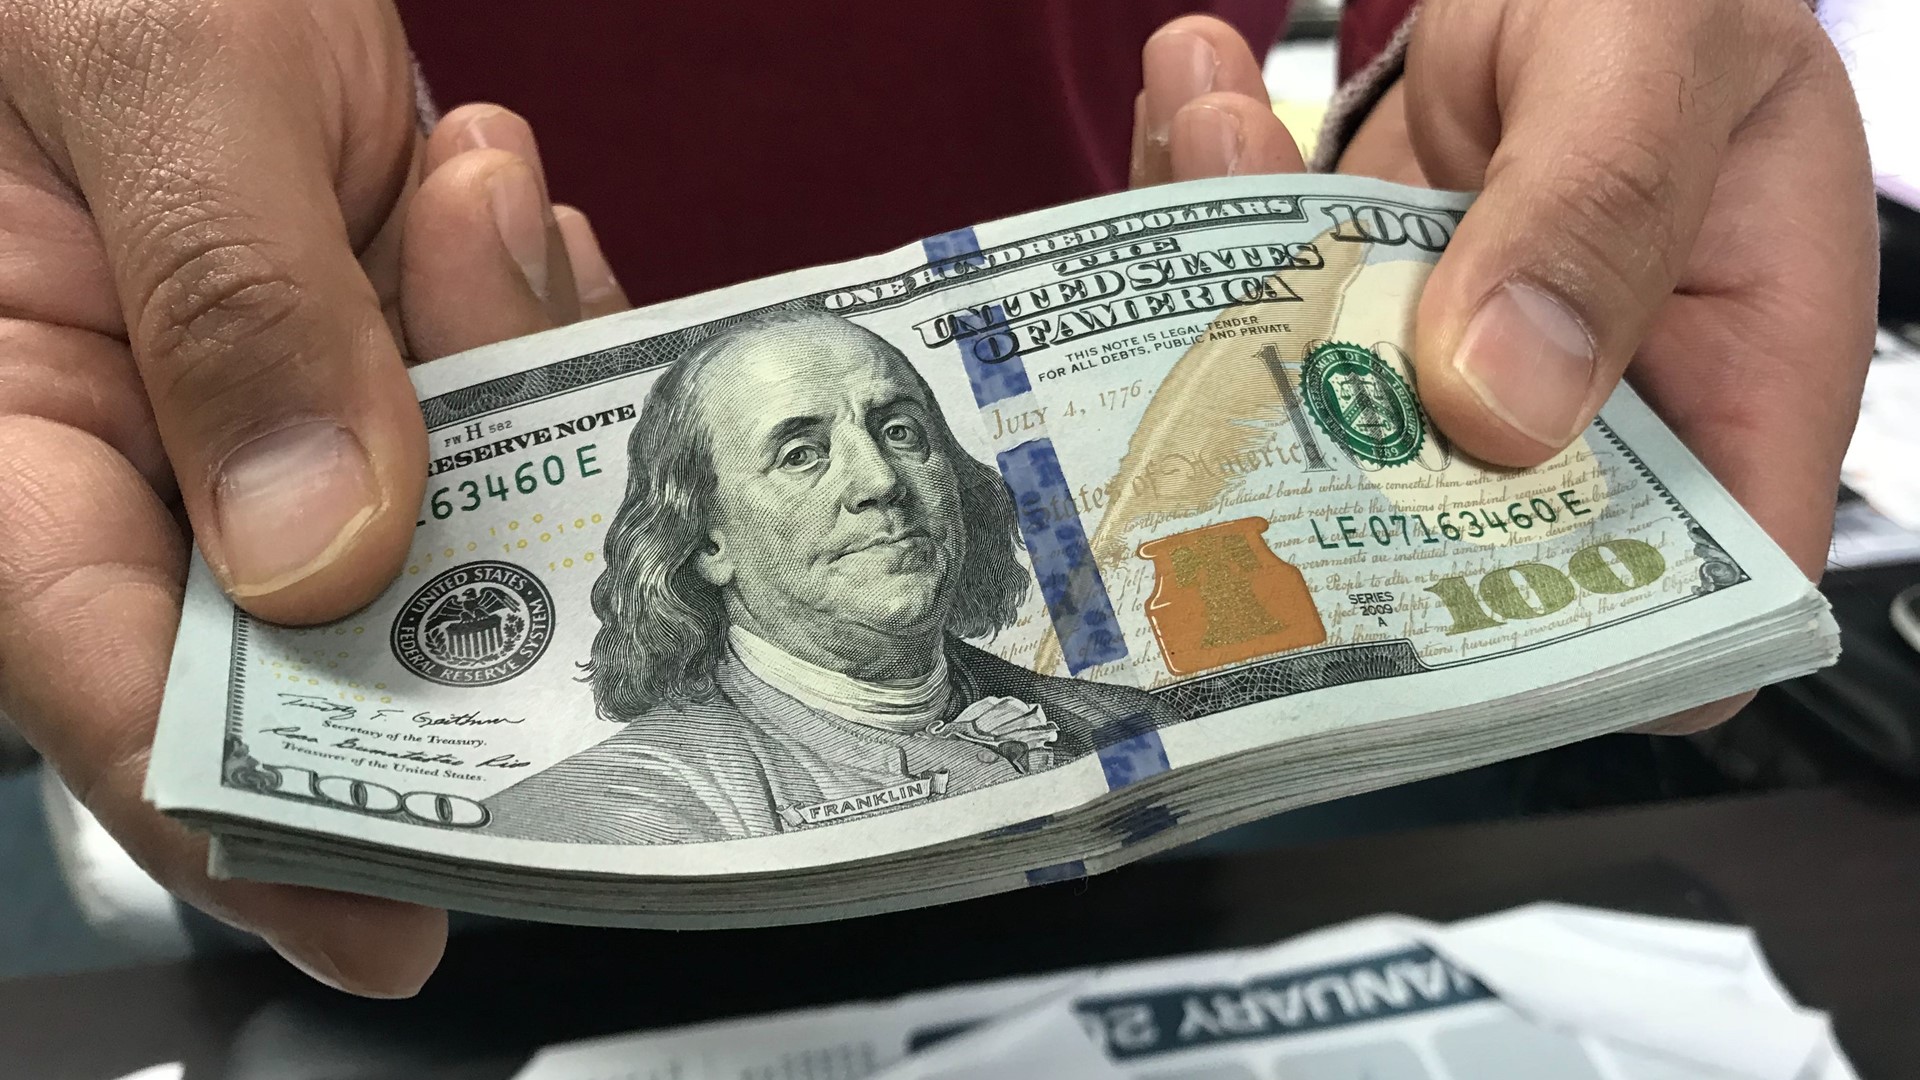 A man in Modesto found an envelope full of $5,000 cash, but, instead of keeping it, he's hoping to do the right thing and find it's rightful owner.